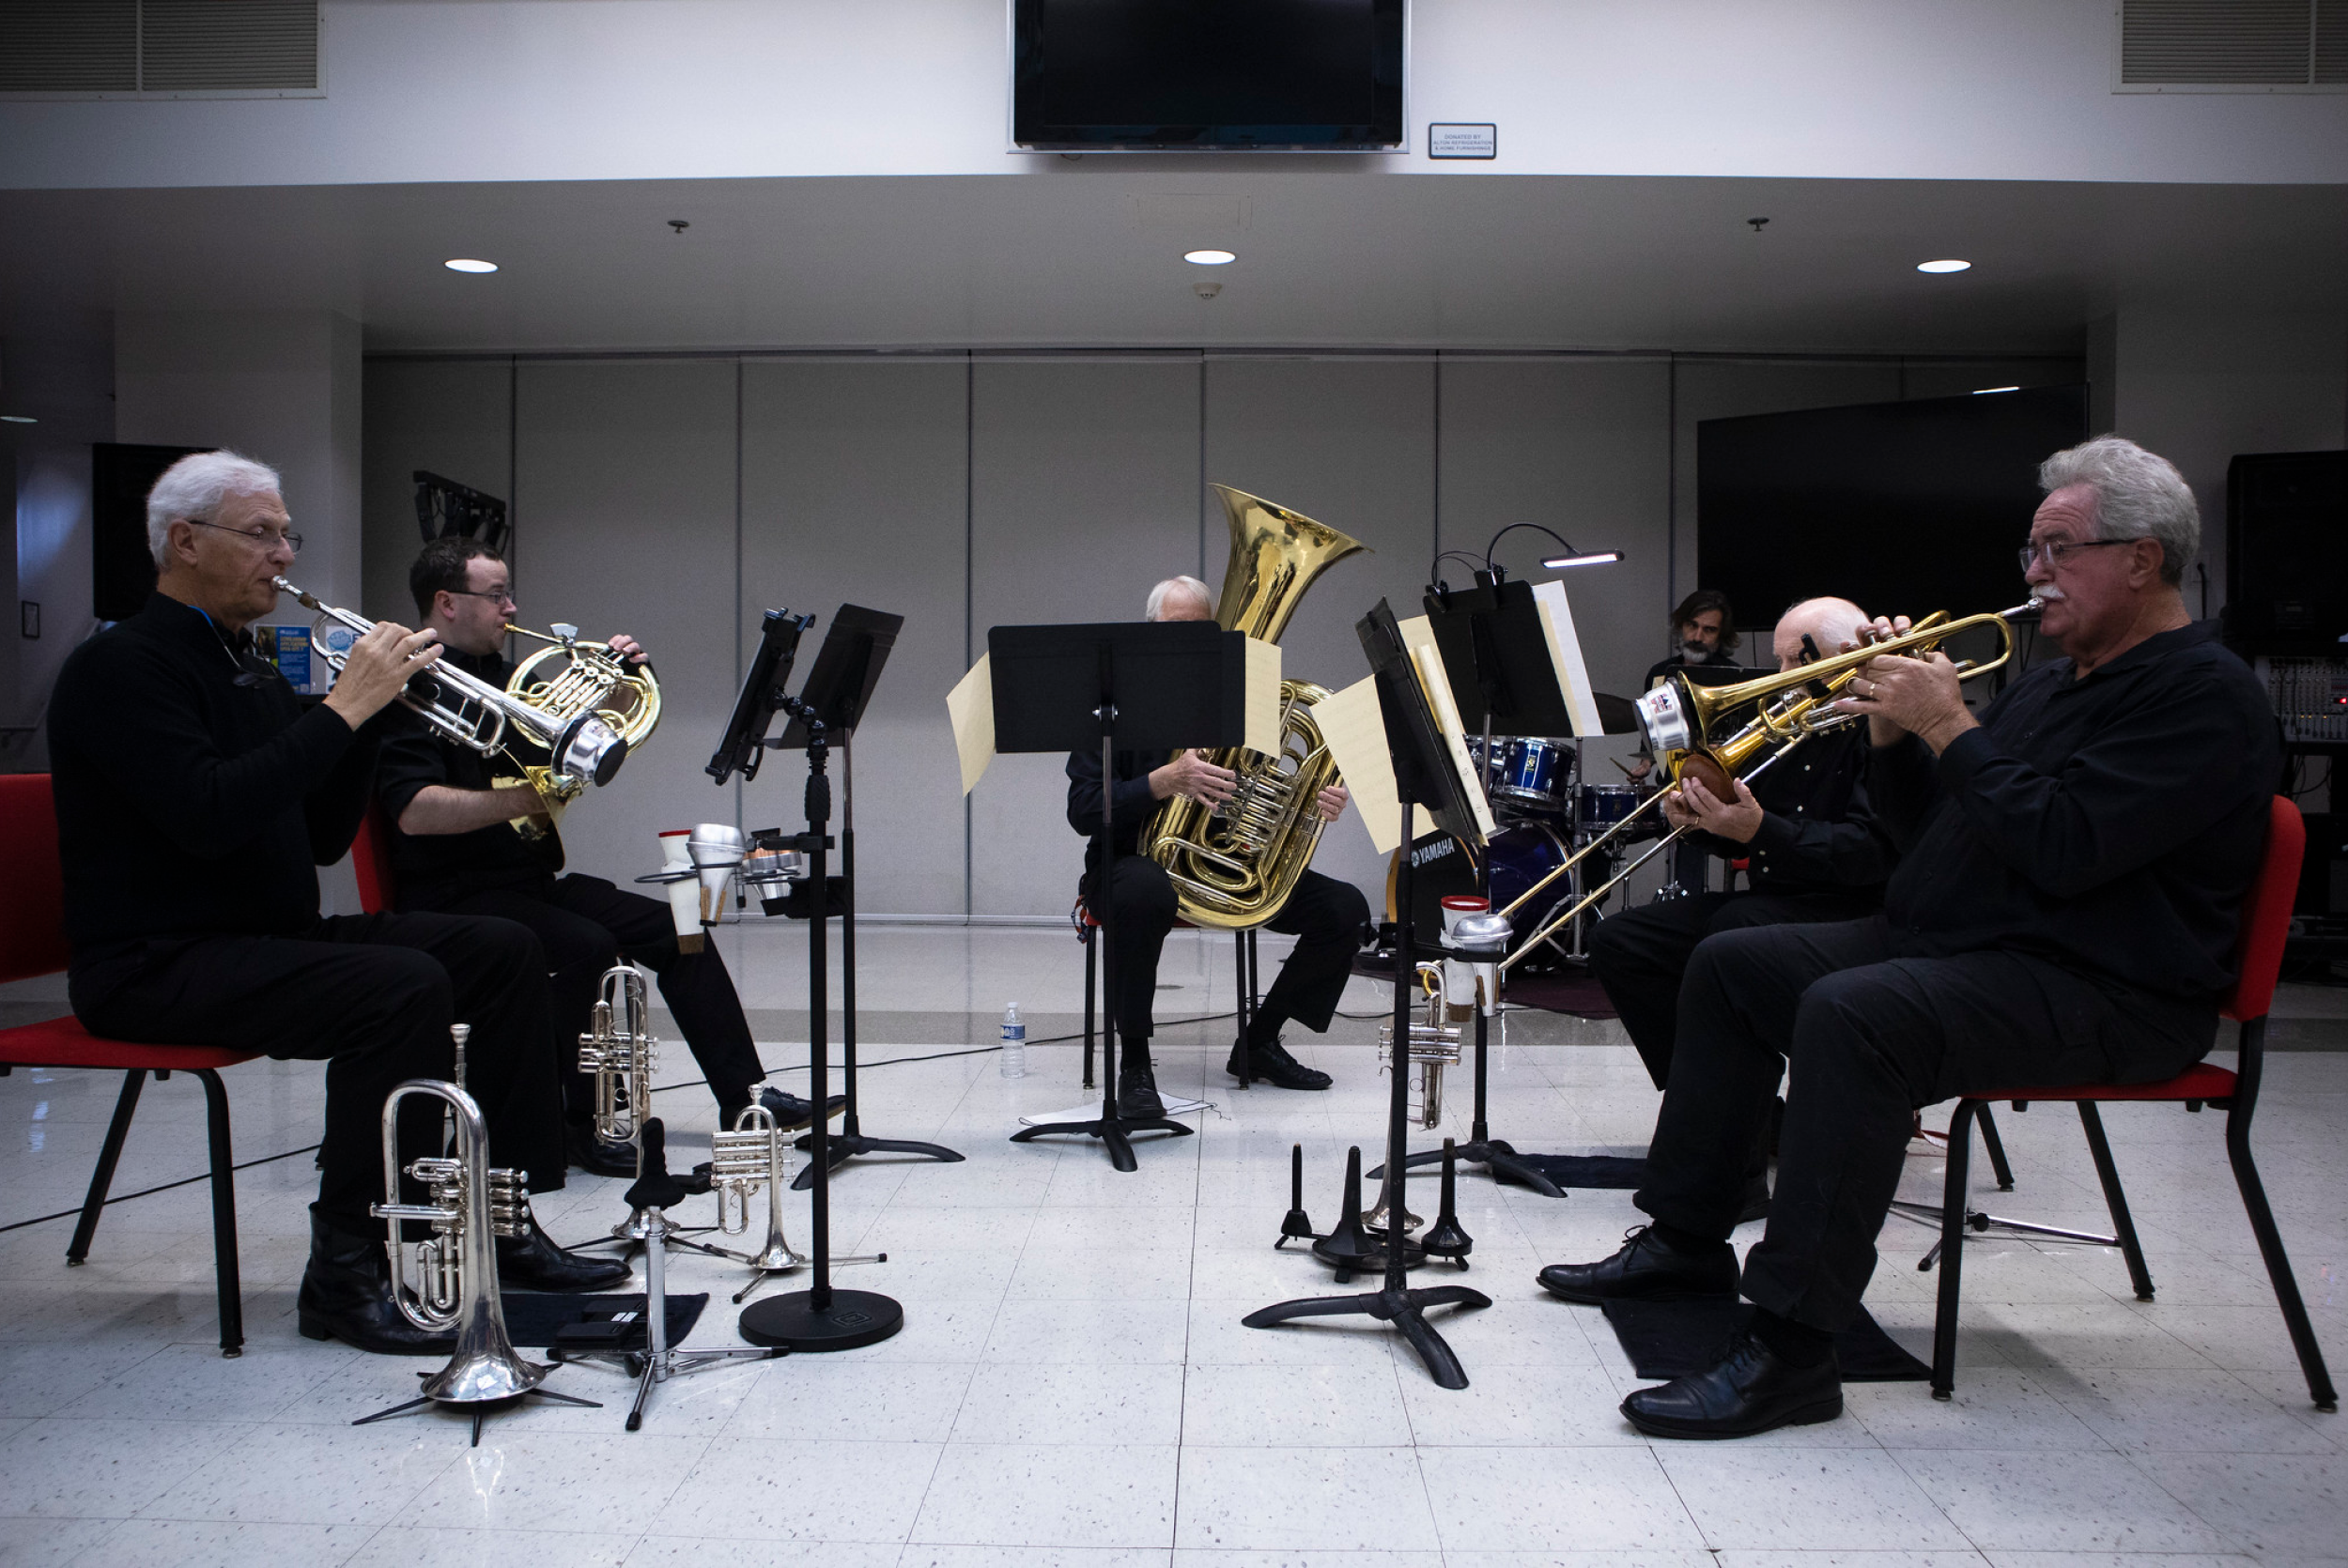 Five amazing brass players play during concert in the Ringhousen music building.